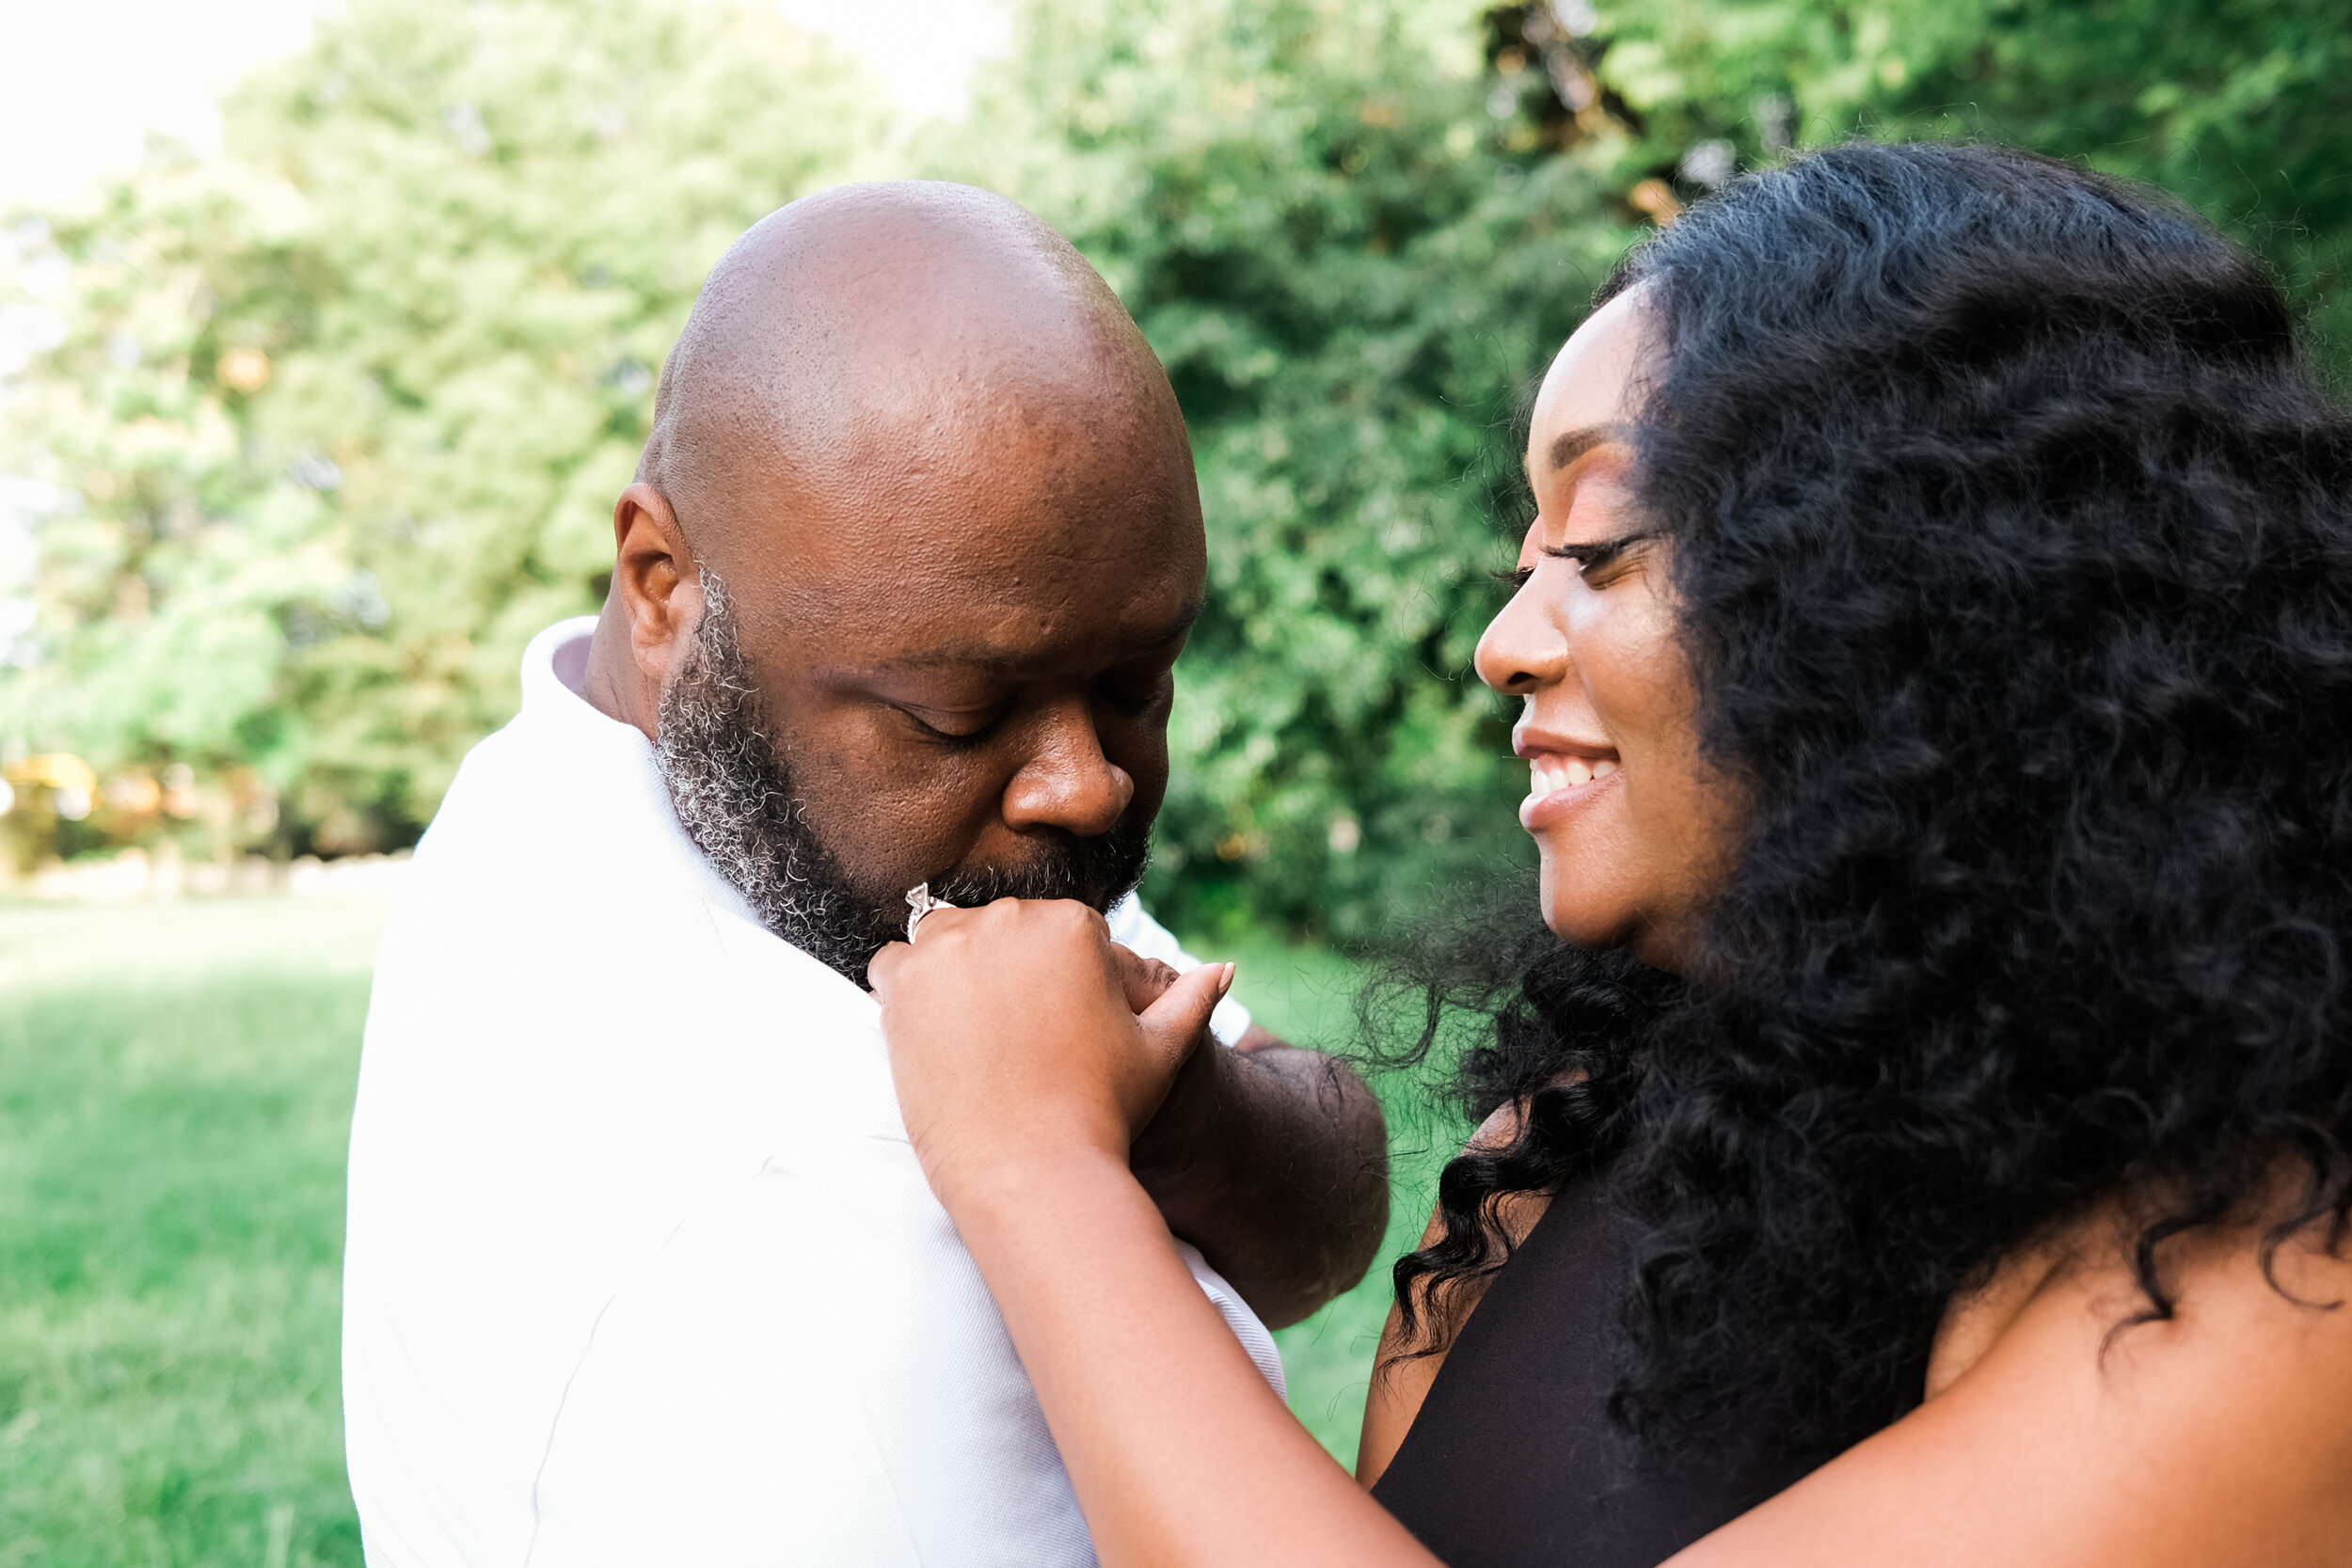 Patterson Park Engagement Session with Black Photographers Megapixels media in Baltimore Maryland (28 of 32).jpg